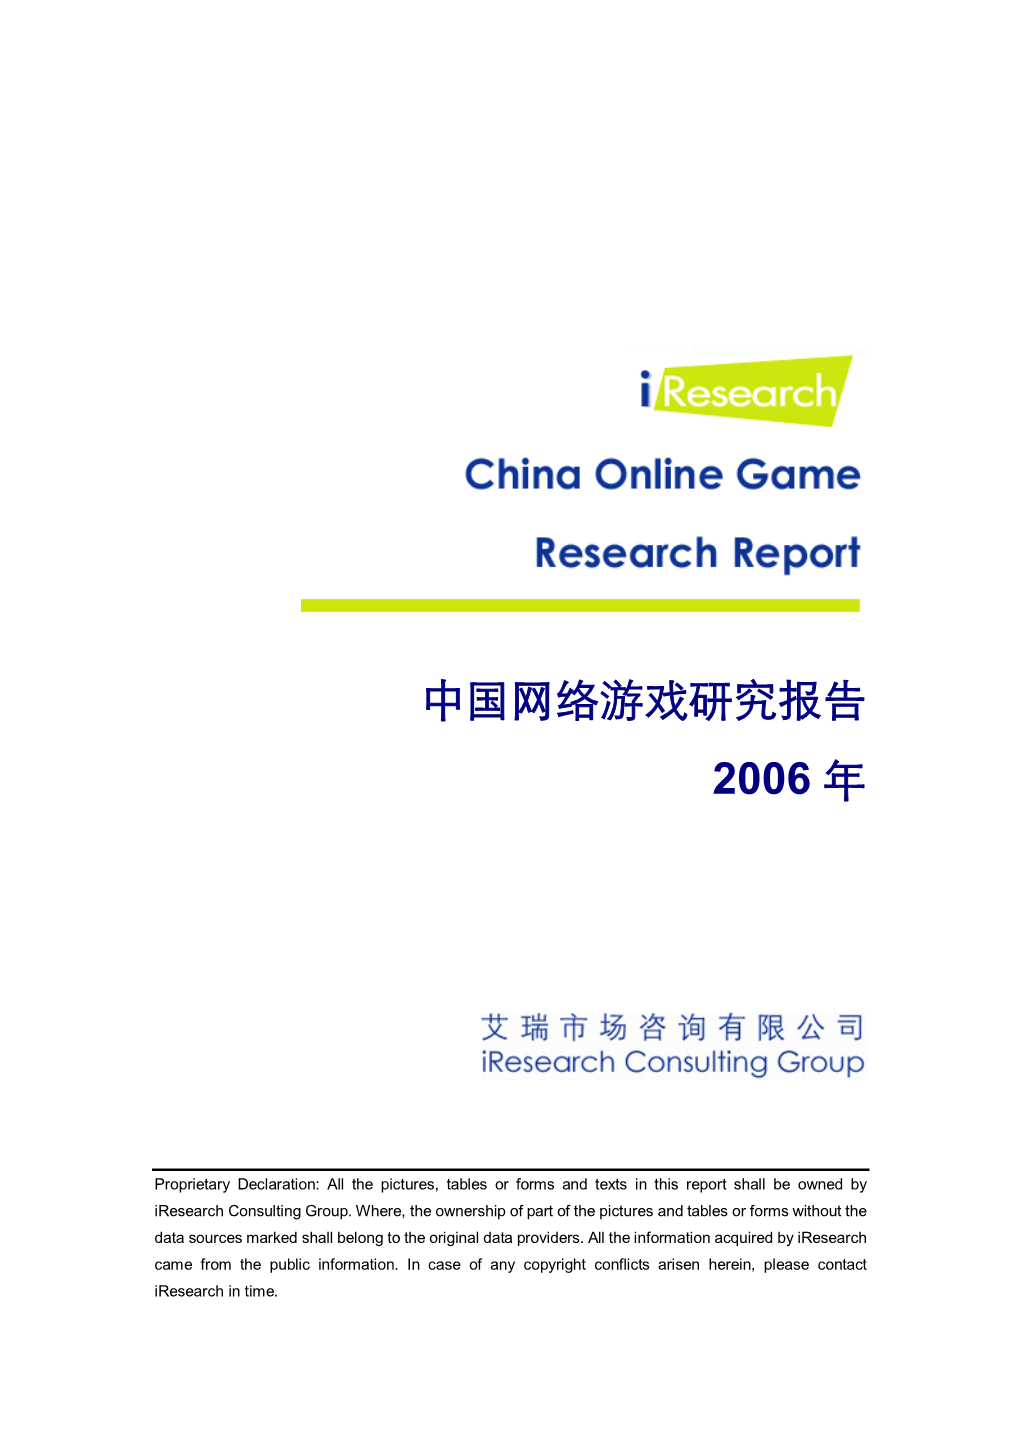 Iresearch-2006 China Online Game Research Report Simple Version